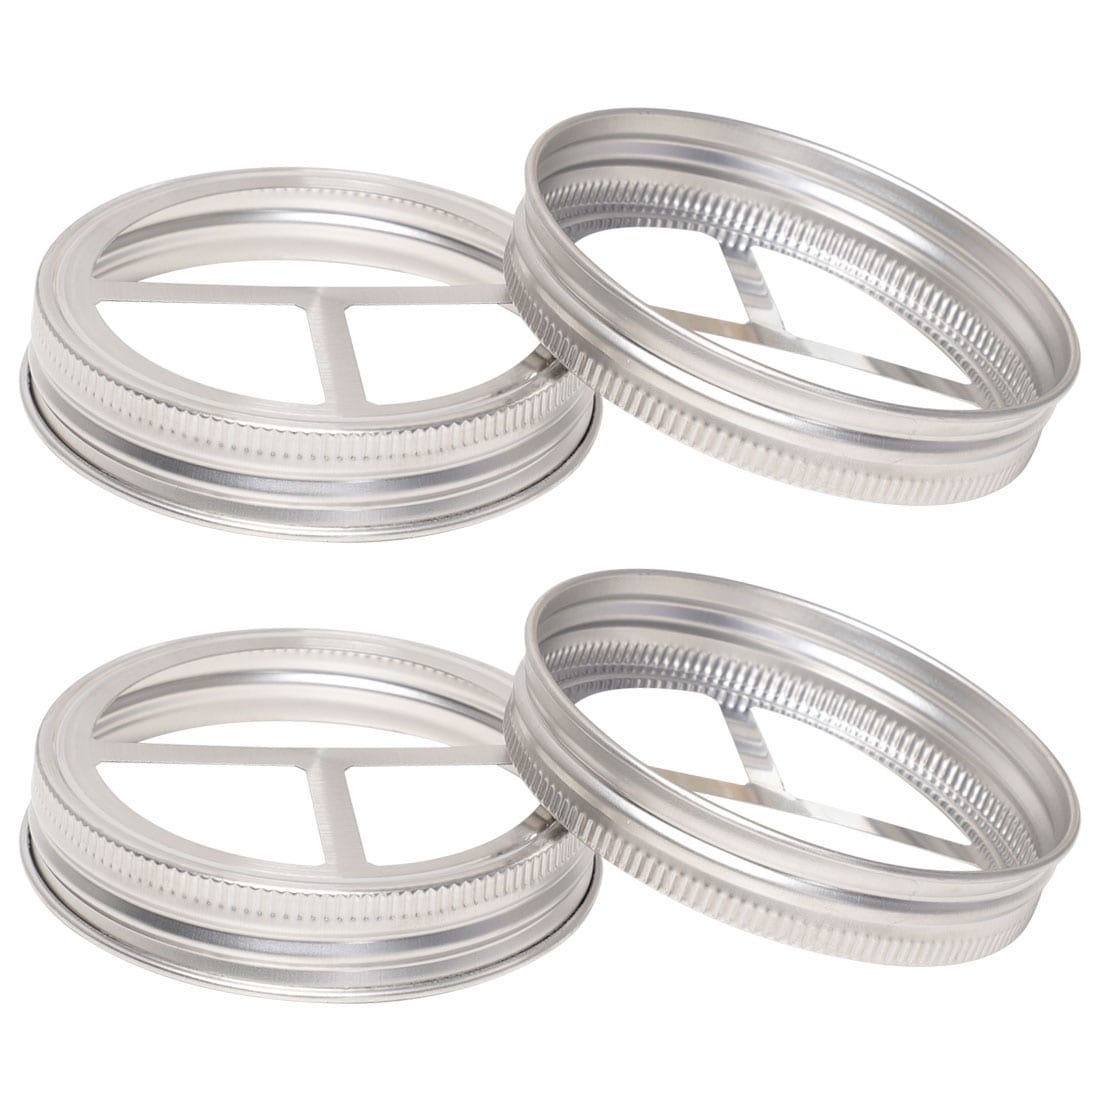 Ball Jar Stainless Steel One-Piece Mason Jar Lids, Wide Mouth, 3-Pack